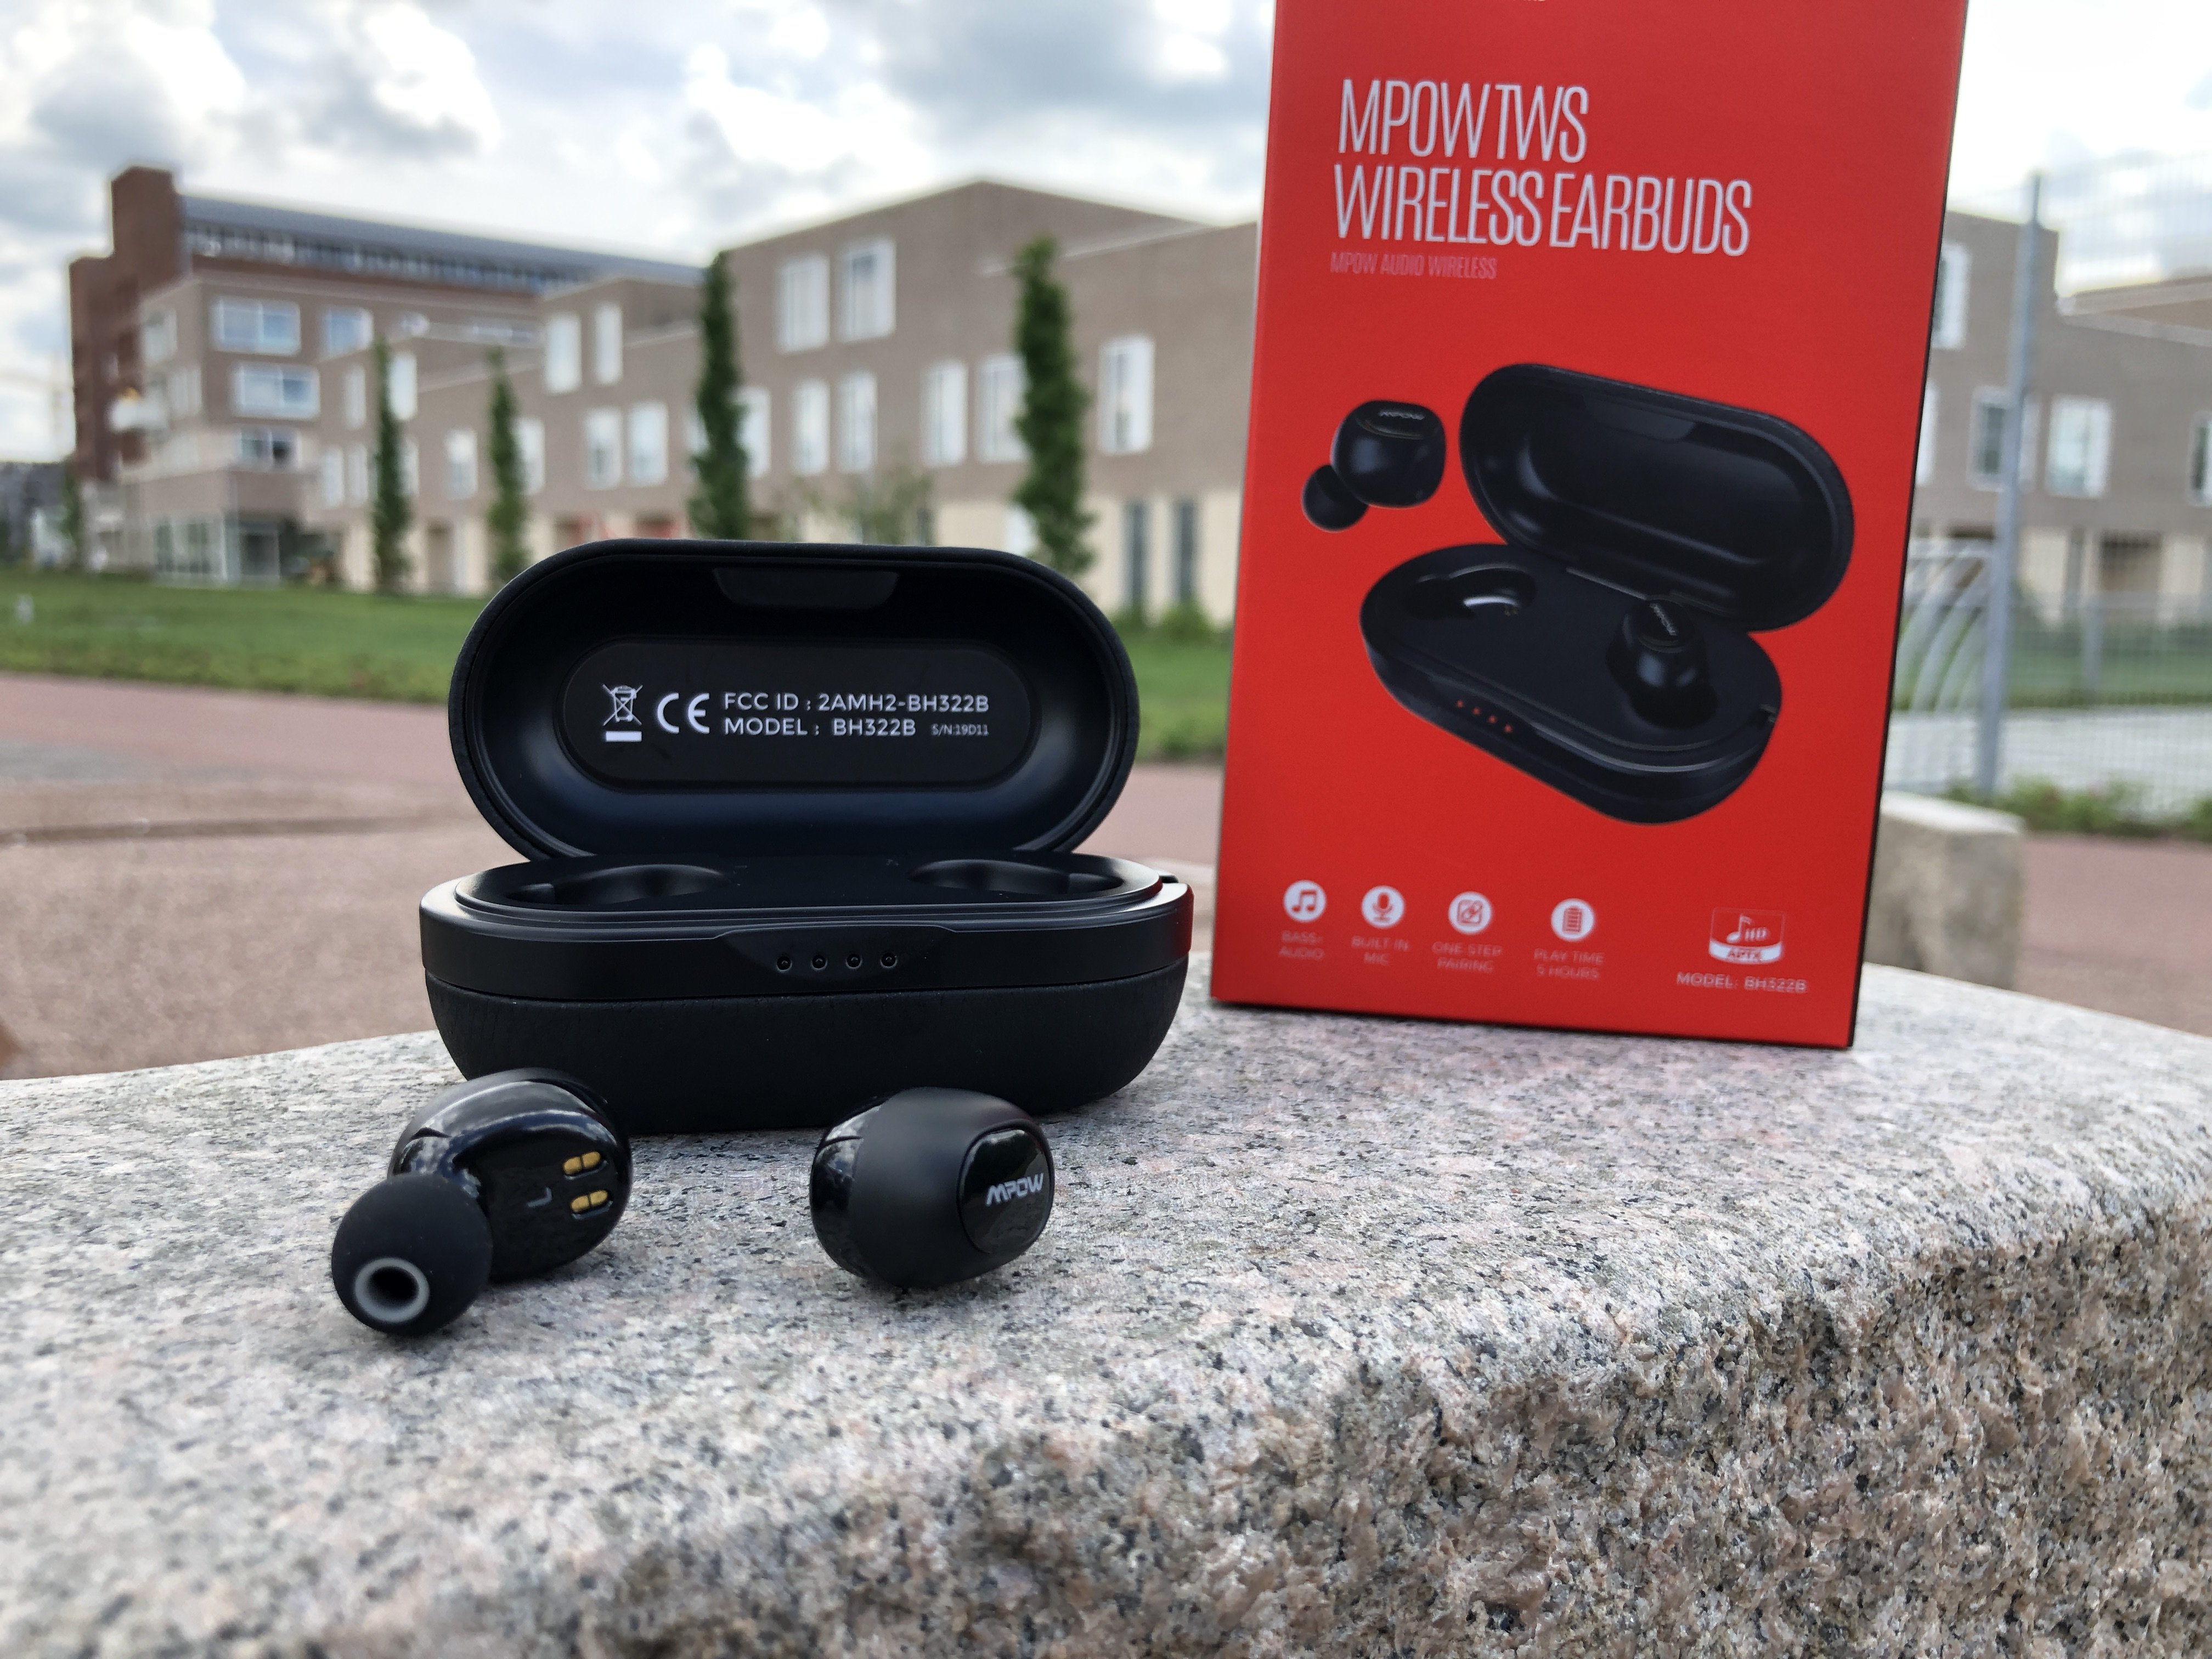 Shining Betaling Åh gud Scarbir Audio on Twitter: "Here's my review of the Mpow T5 by @MpowOfficial  - great sounding true #wireless #earphones for a great price  https://t.co/2e29BRm1vk https://t.co/JAKBUCQDJ6" / Twitter